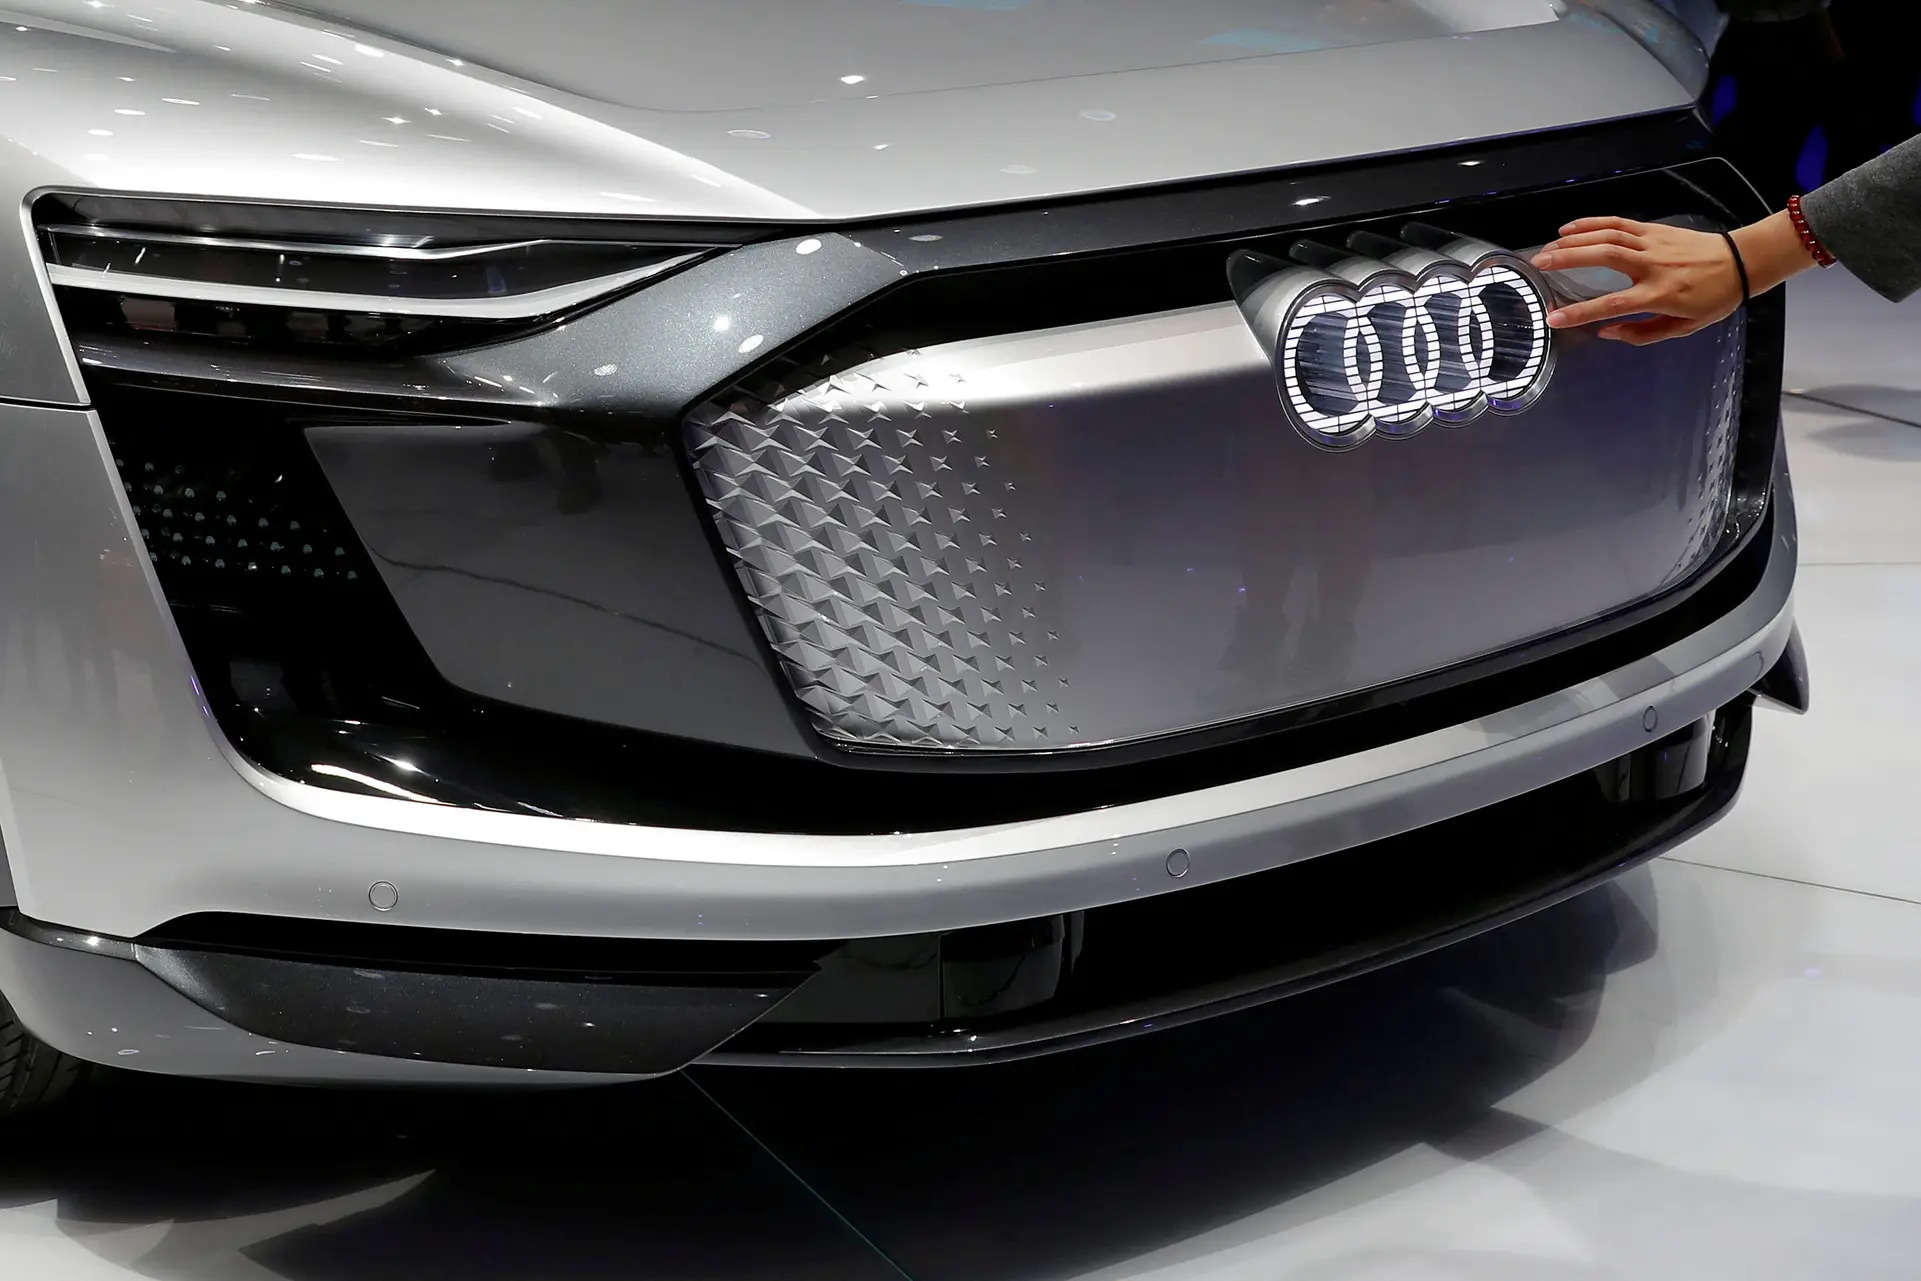 Audi's new China EV series won't have signature four-ring logo, sources say 